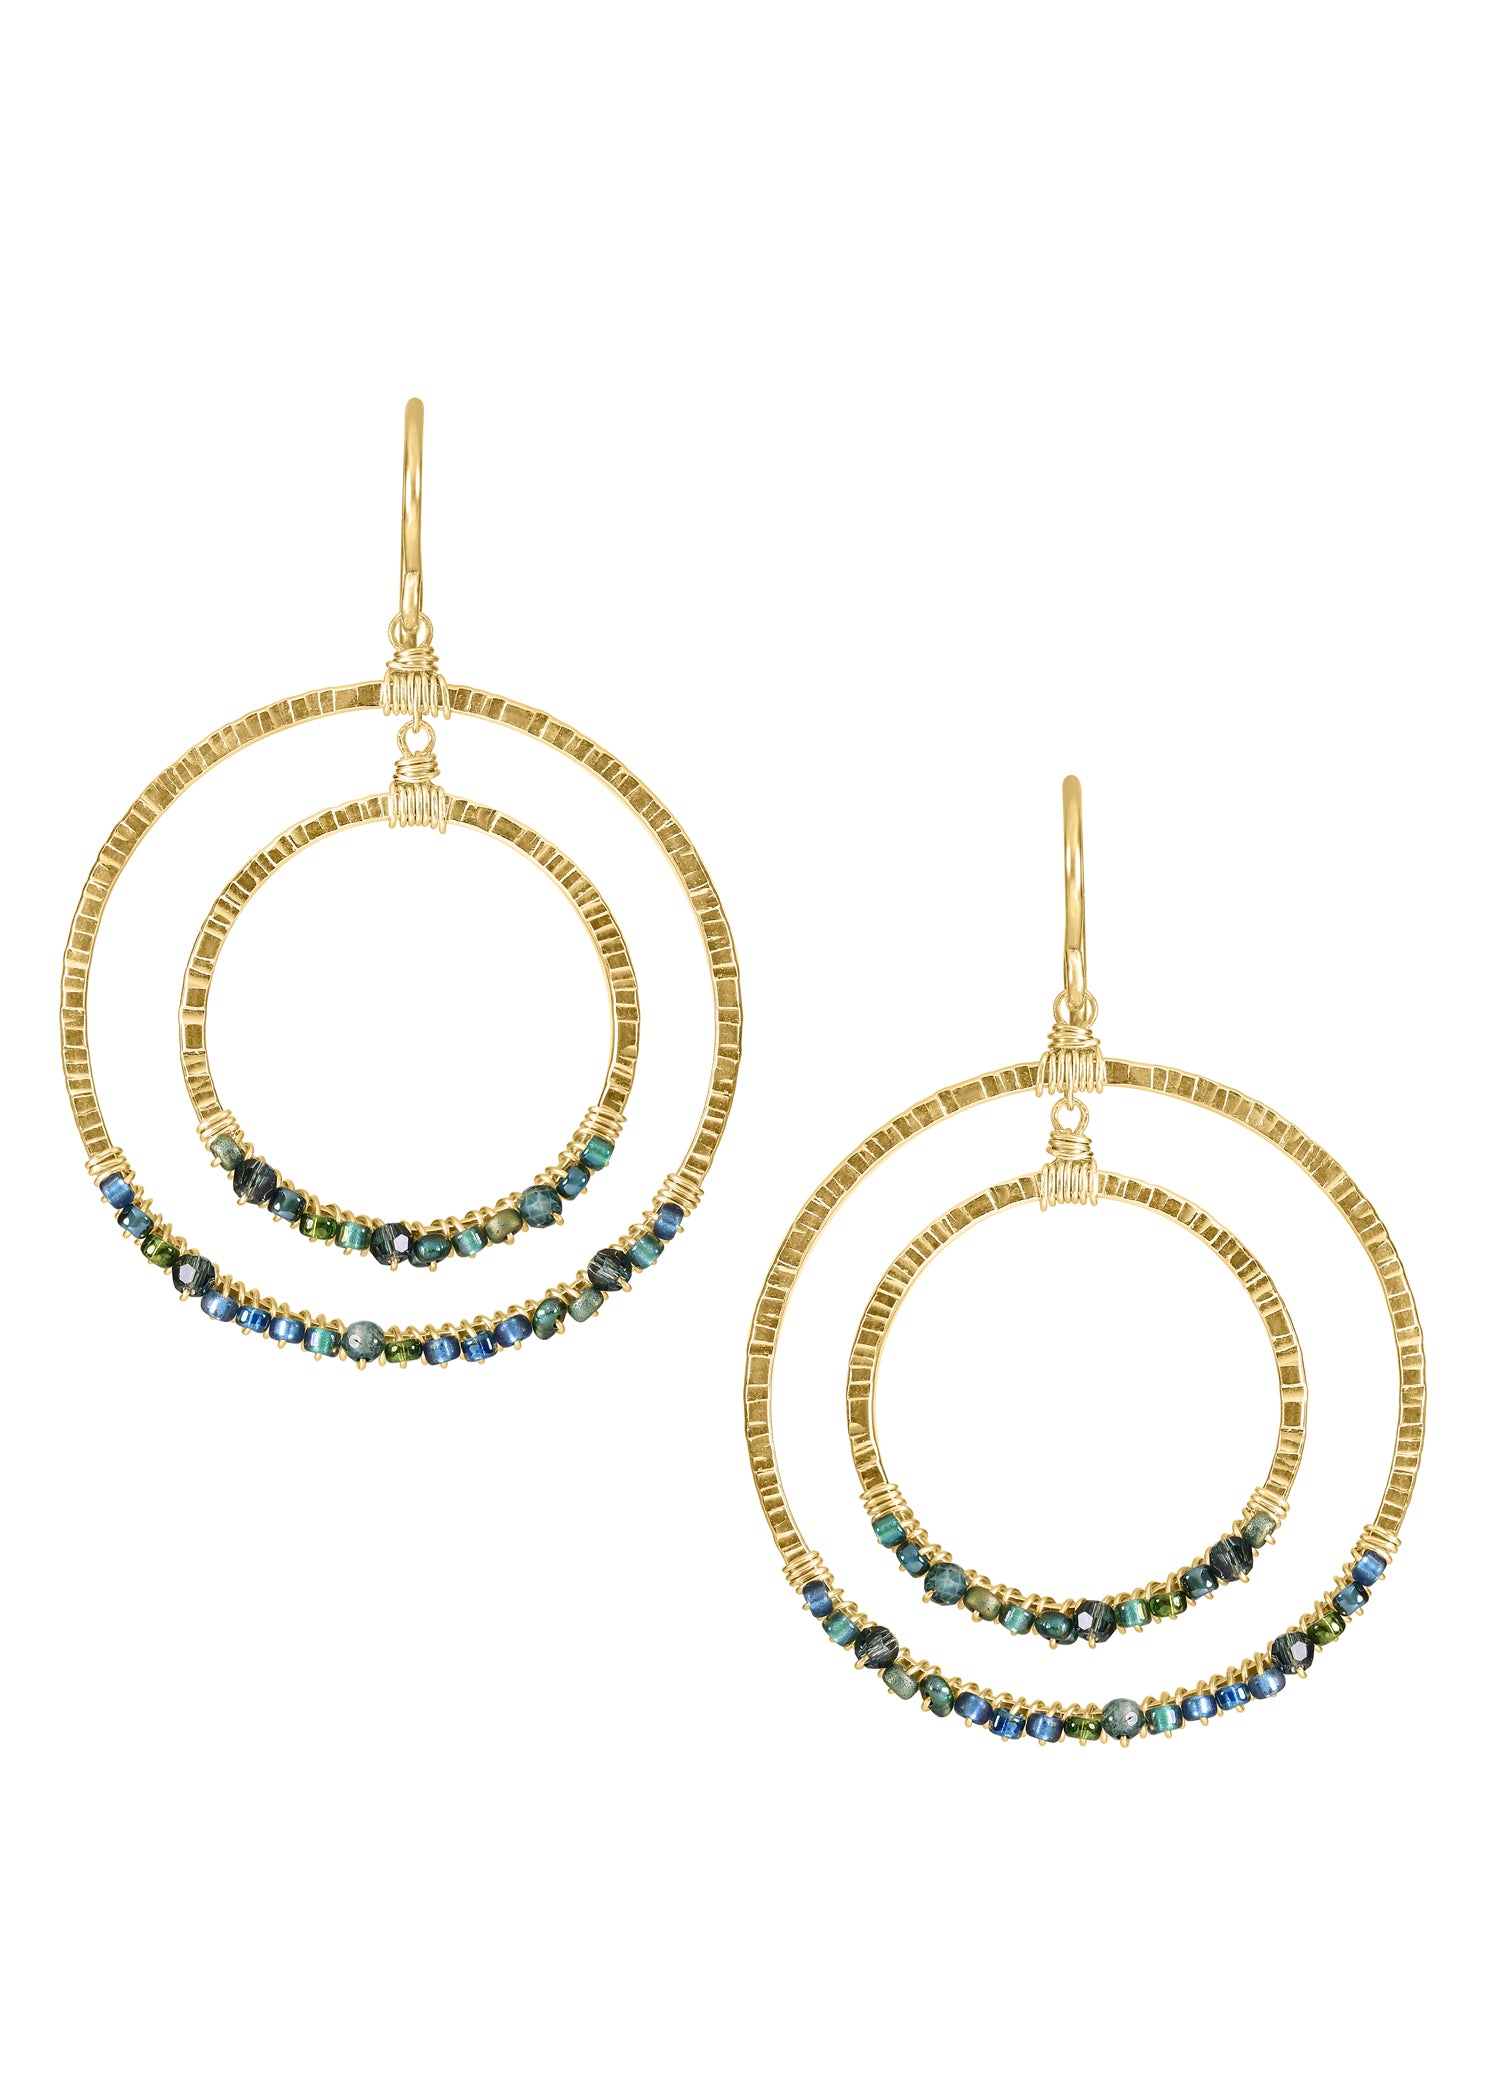 Teal quartz Crystal Seed beads 14k gold fill Earrings measure 1-5/8" in length (including the ear wires) Outer diameter measures 1-3/16" Handmade in our Los Angeles studio